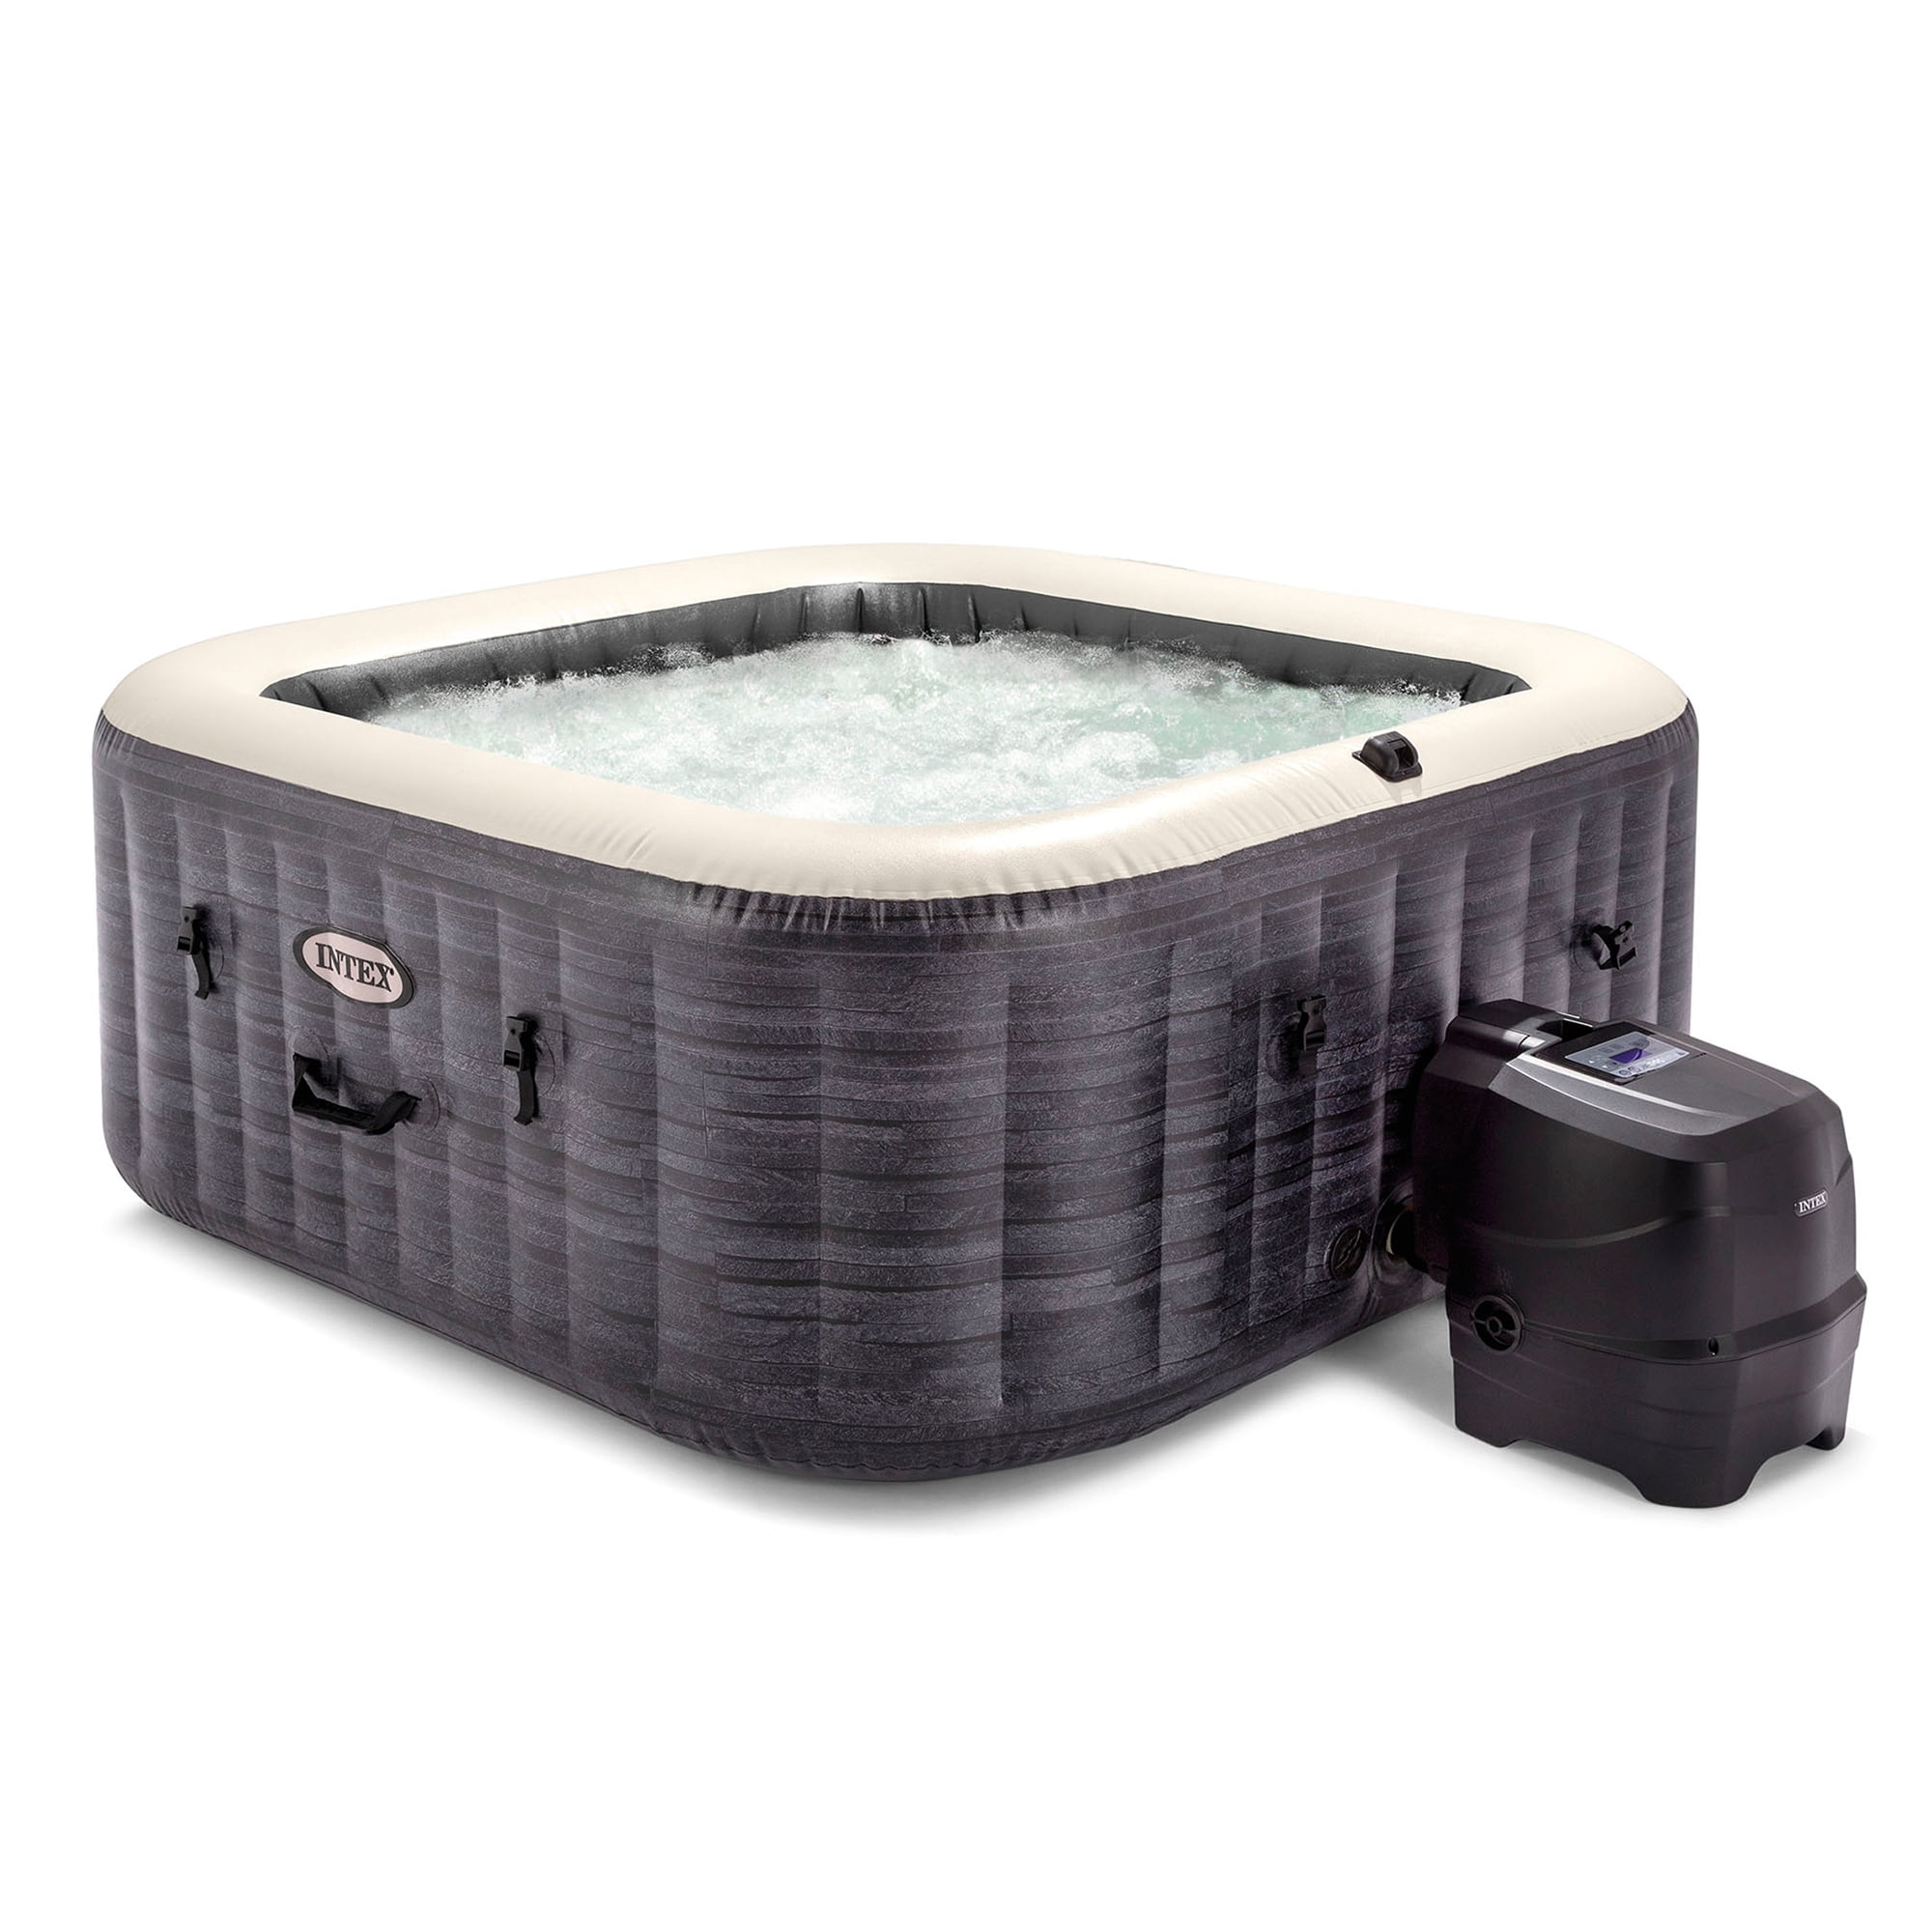 Black JLeisure Avenli London 686 Liter 49 inch 2 to 3 Person Inflatable Hot Tub Spa with Insulated Tub Cover and Floor Protector 